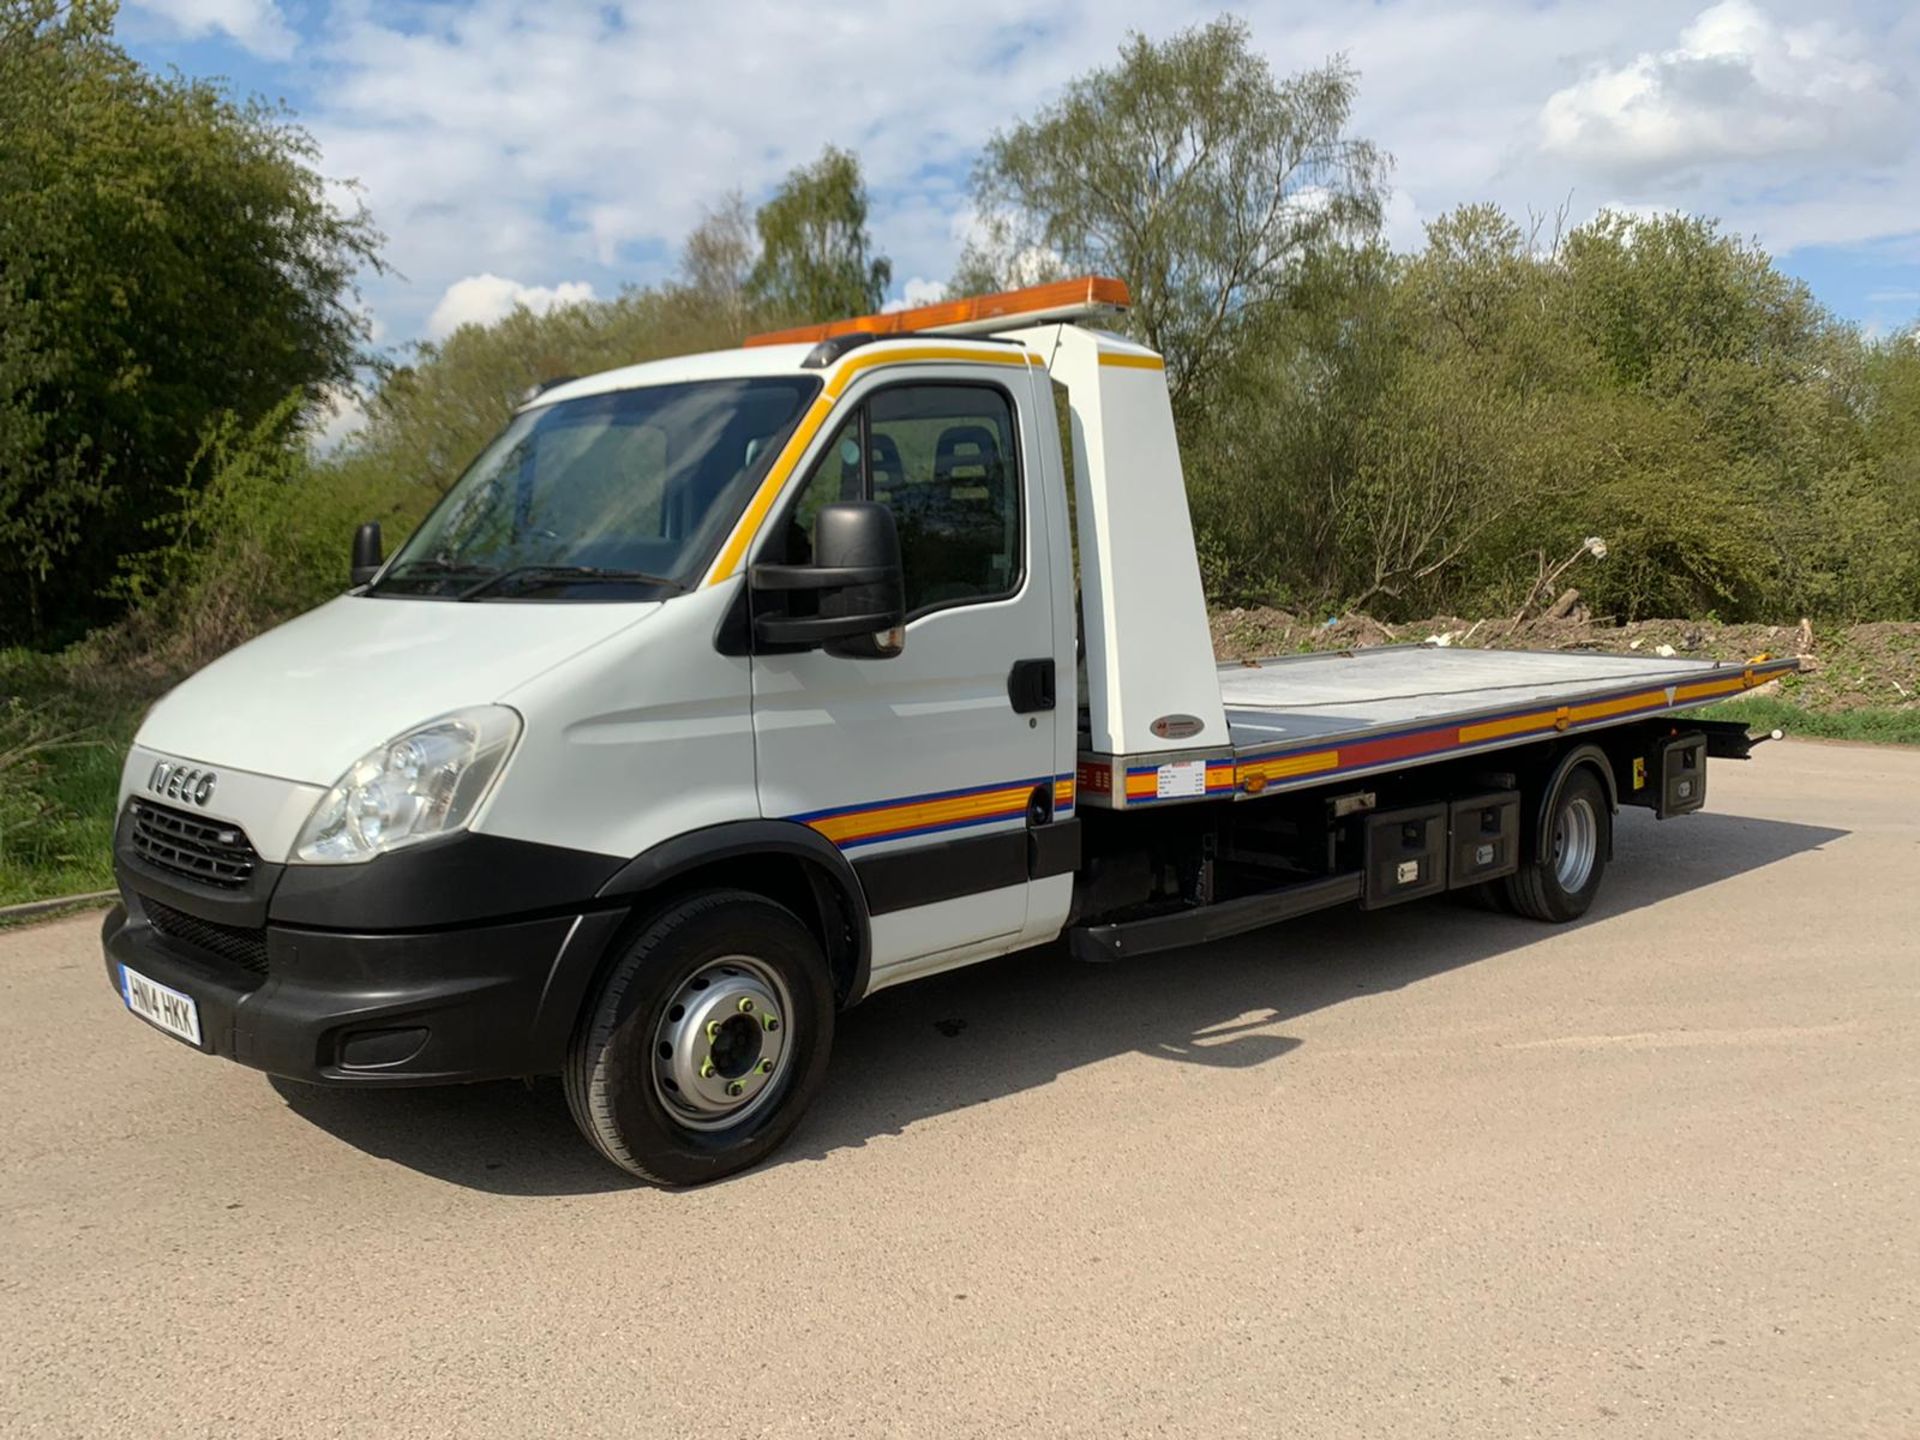 2014 IVECO DAILY 70C17 TILT & SLIDE RECOVERY, 3.0 DIESEL ENGINE, SHOWING 0 PREVIOUS KEEPERS - Image 5 of 20